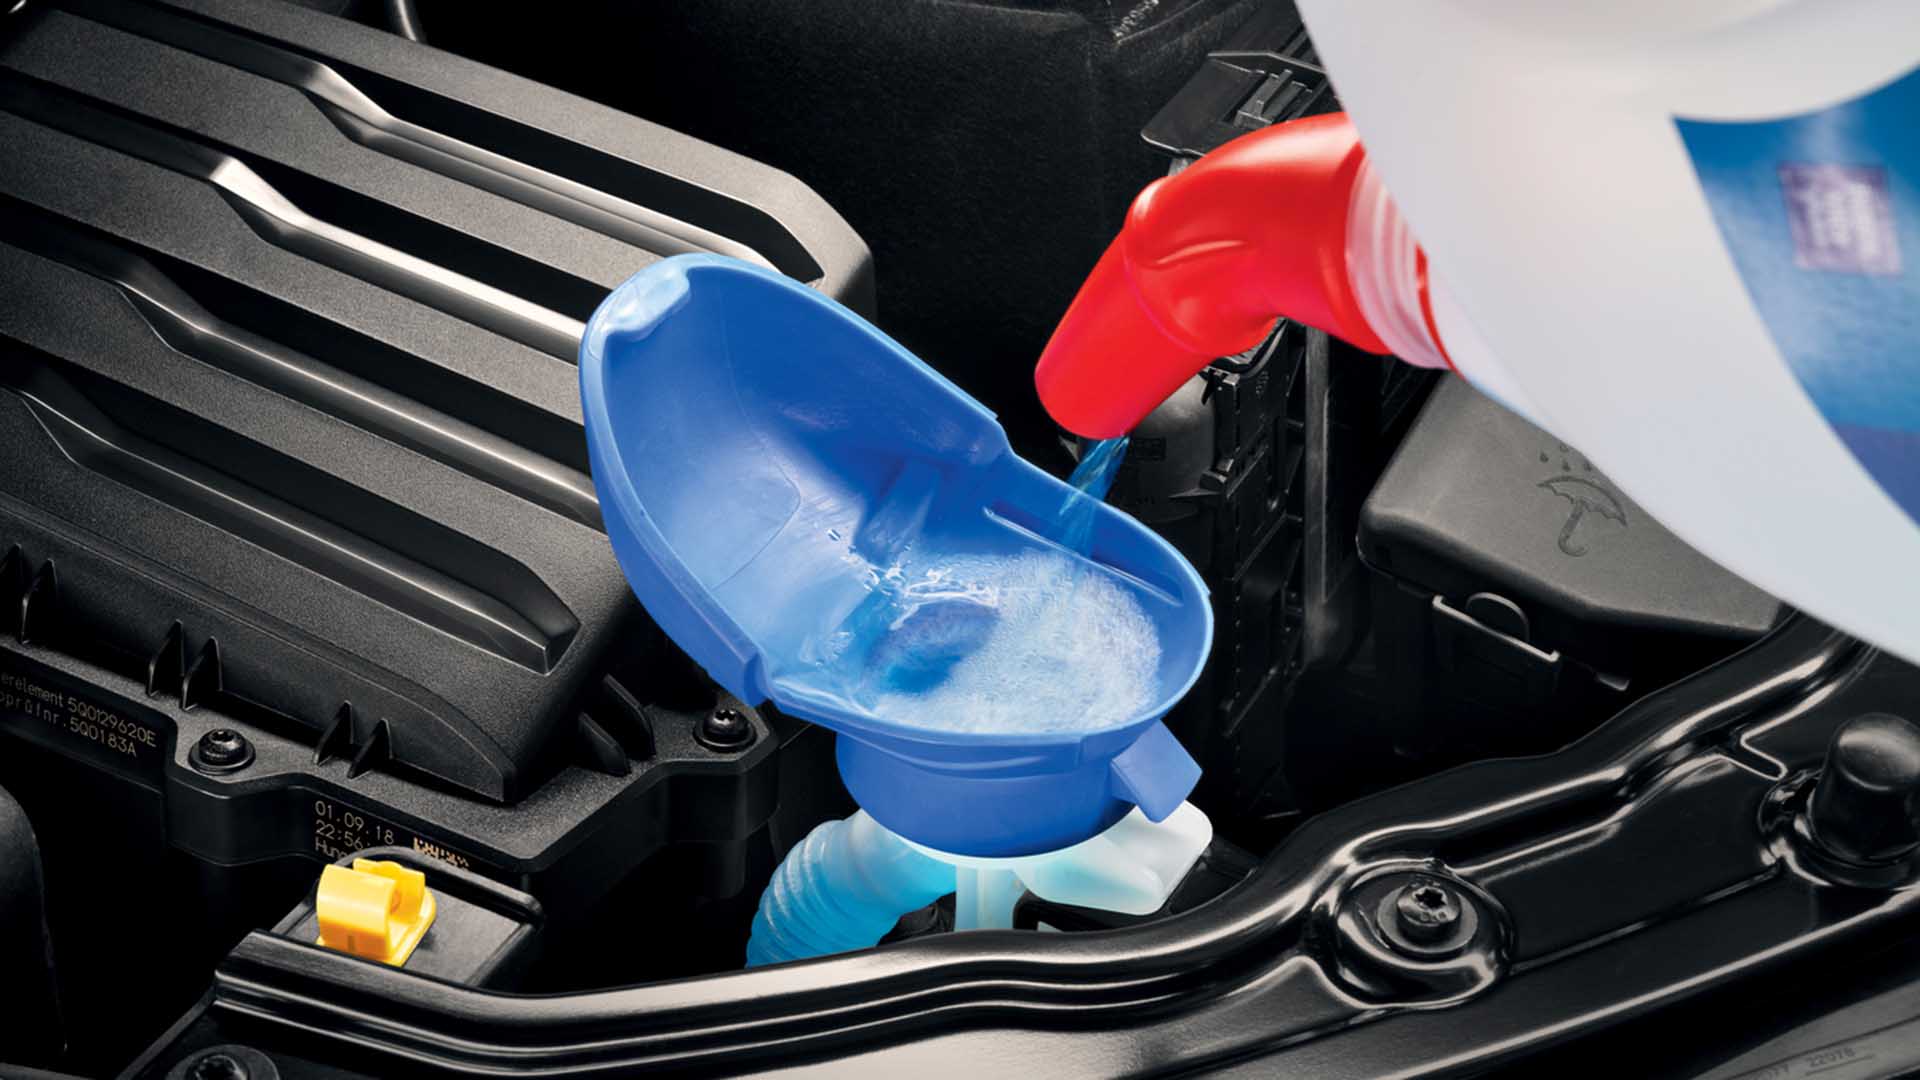 Integrated funnel in lid of windscreen washer tank